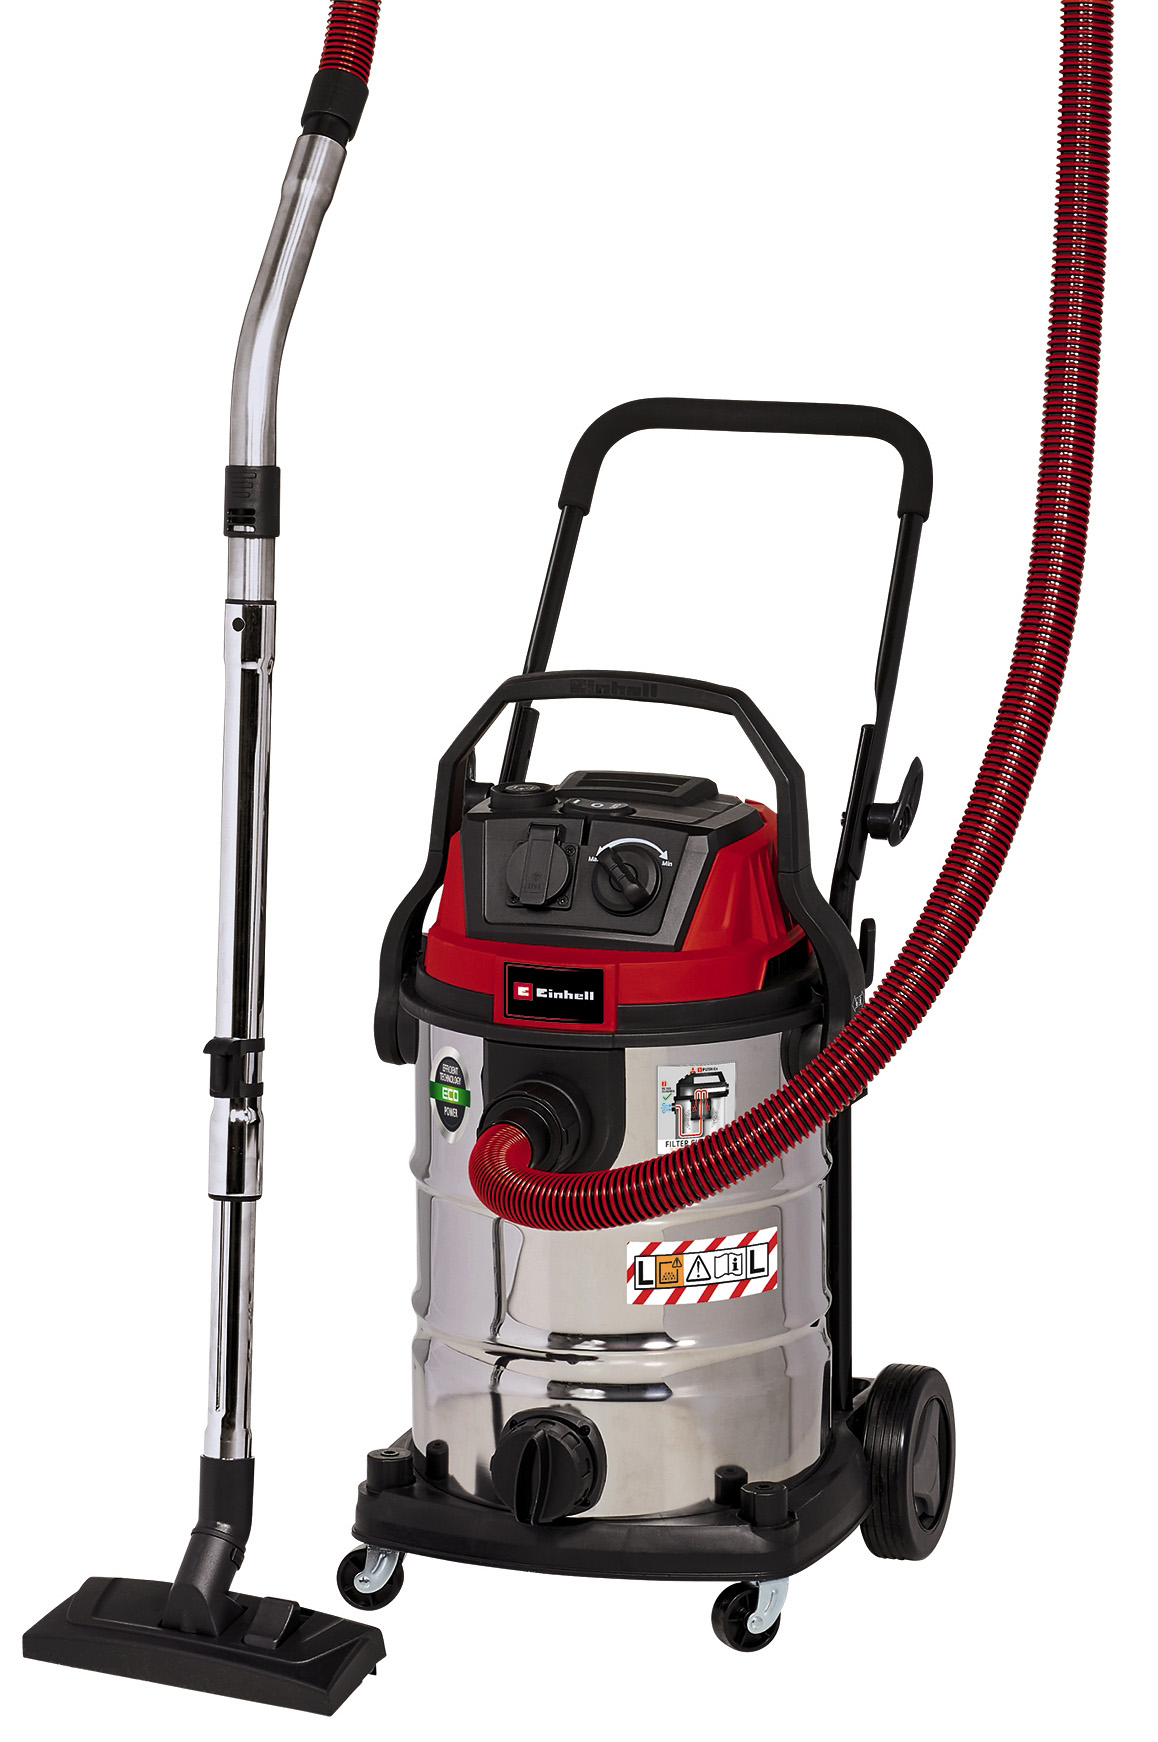 Einhell TE-VC 2230 SACL, 30 Litre Stainless Steel L Class Corded Wet & Dry Vac with Power Take Off - 1400W